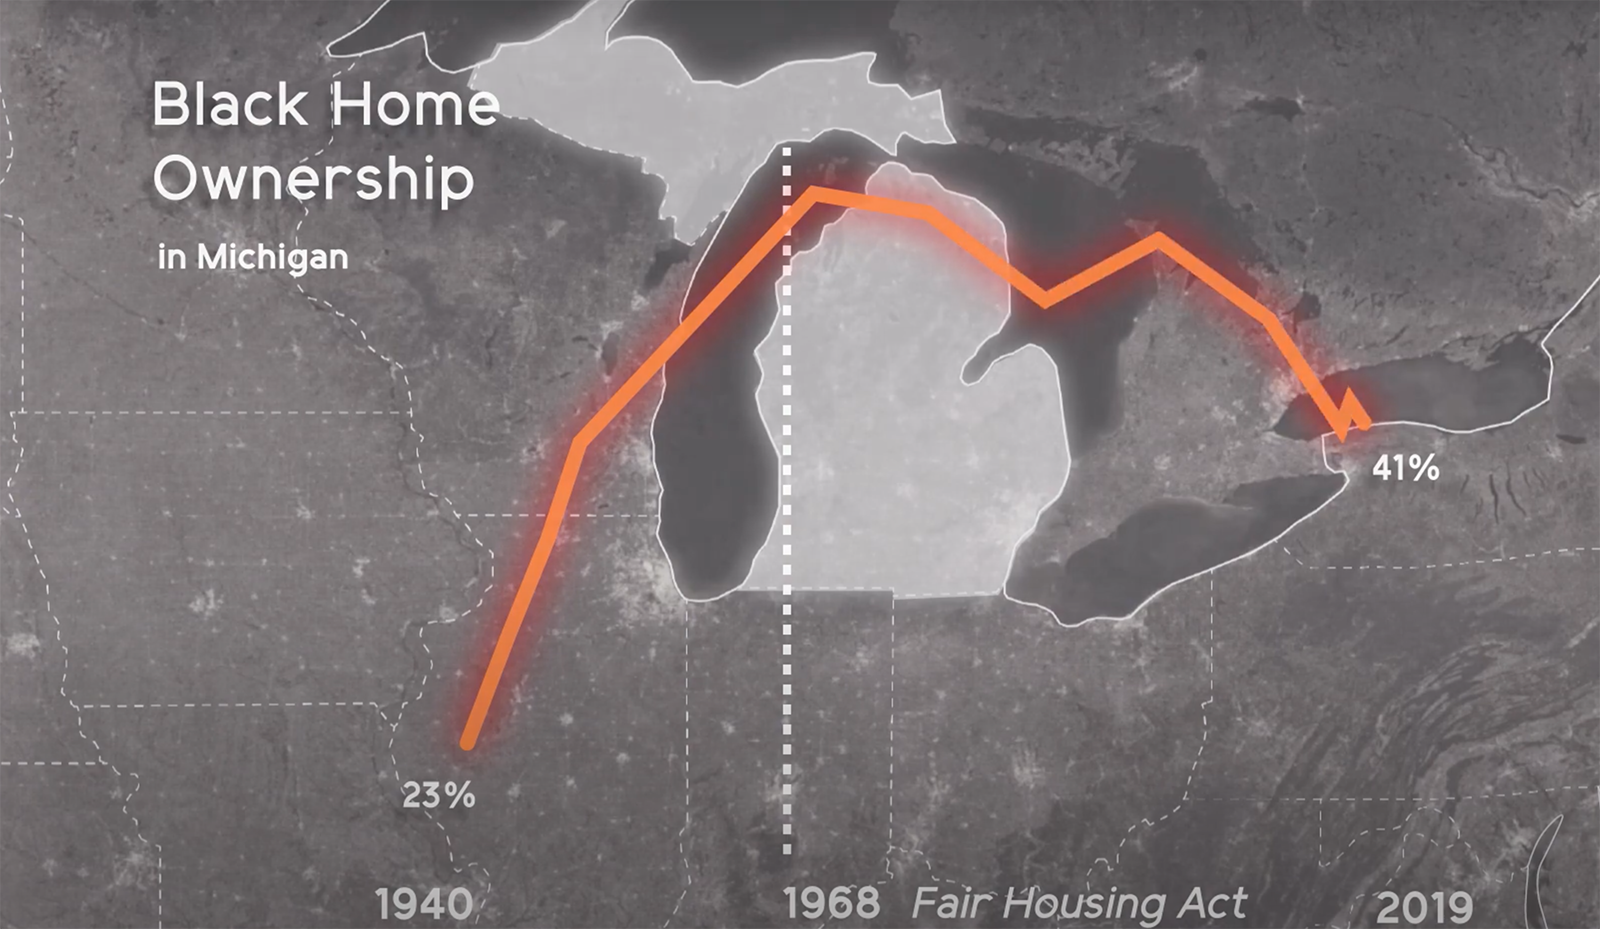 A screenshot from the housing justice video that shows the impact the fair housing act had on black home ownership in Michigan.